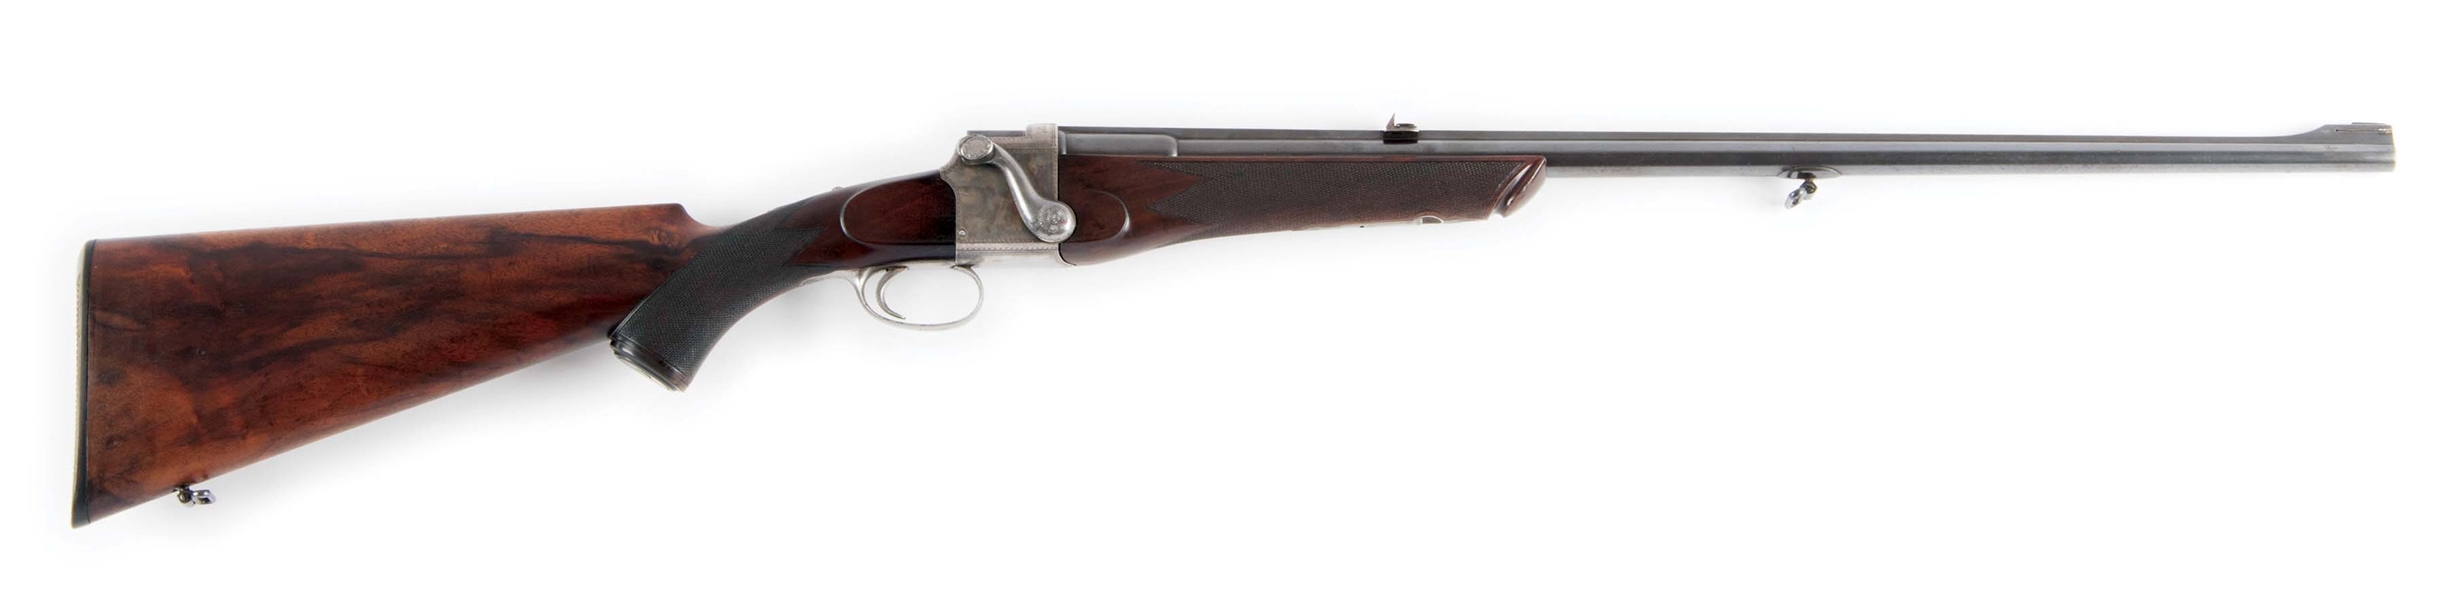 (A) SUPERB QUALITY DANL FRASER .303 FALLING-BLOCK TAKEDOWN SPORTING RIFLE.